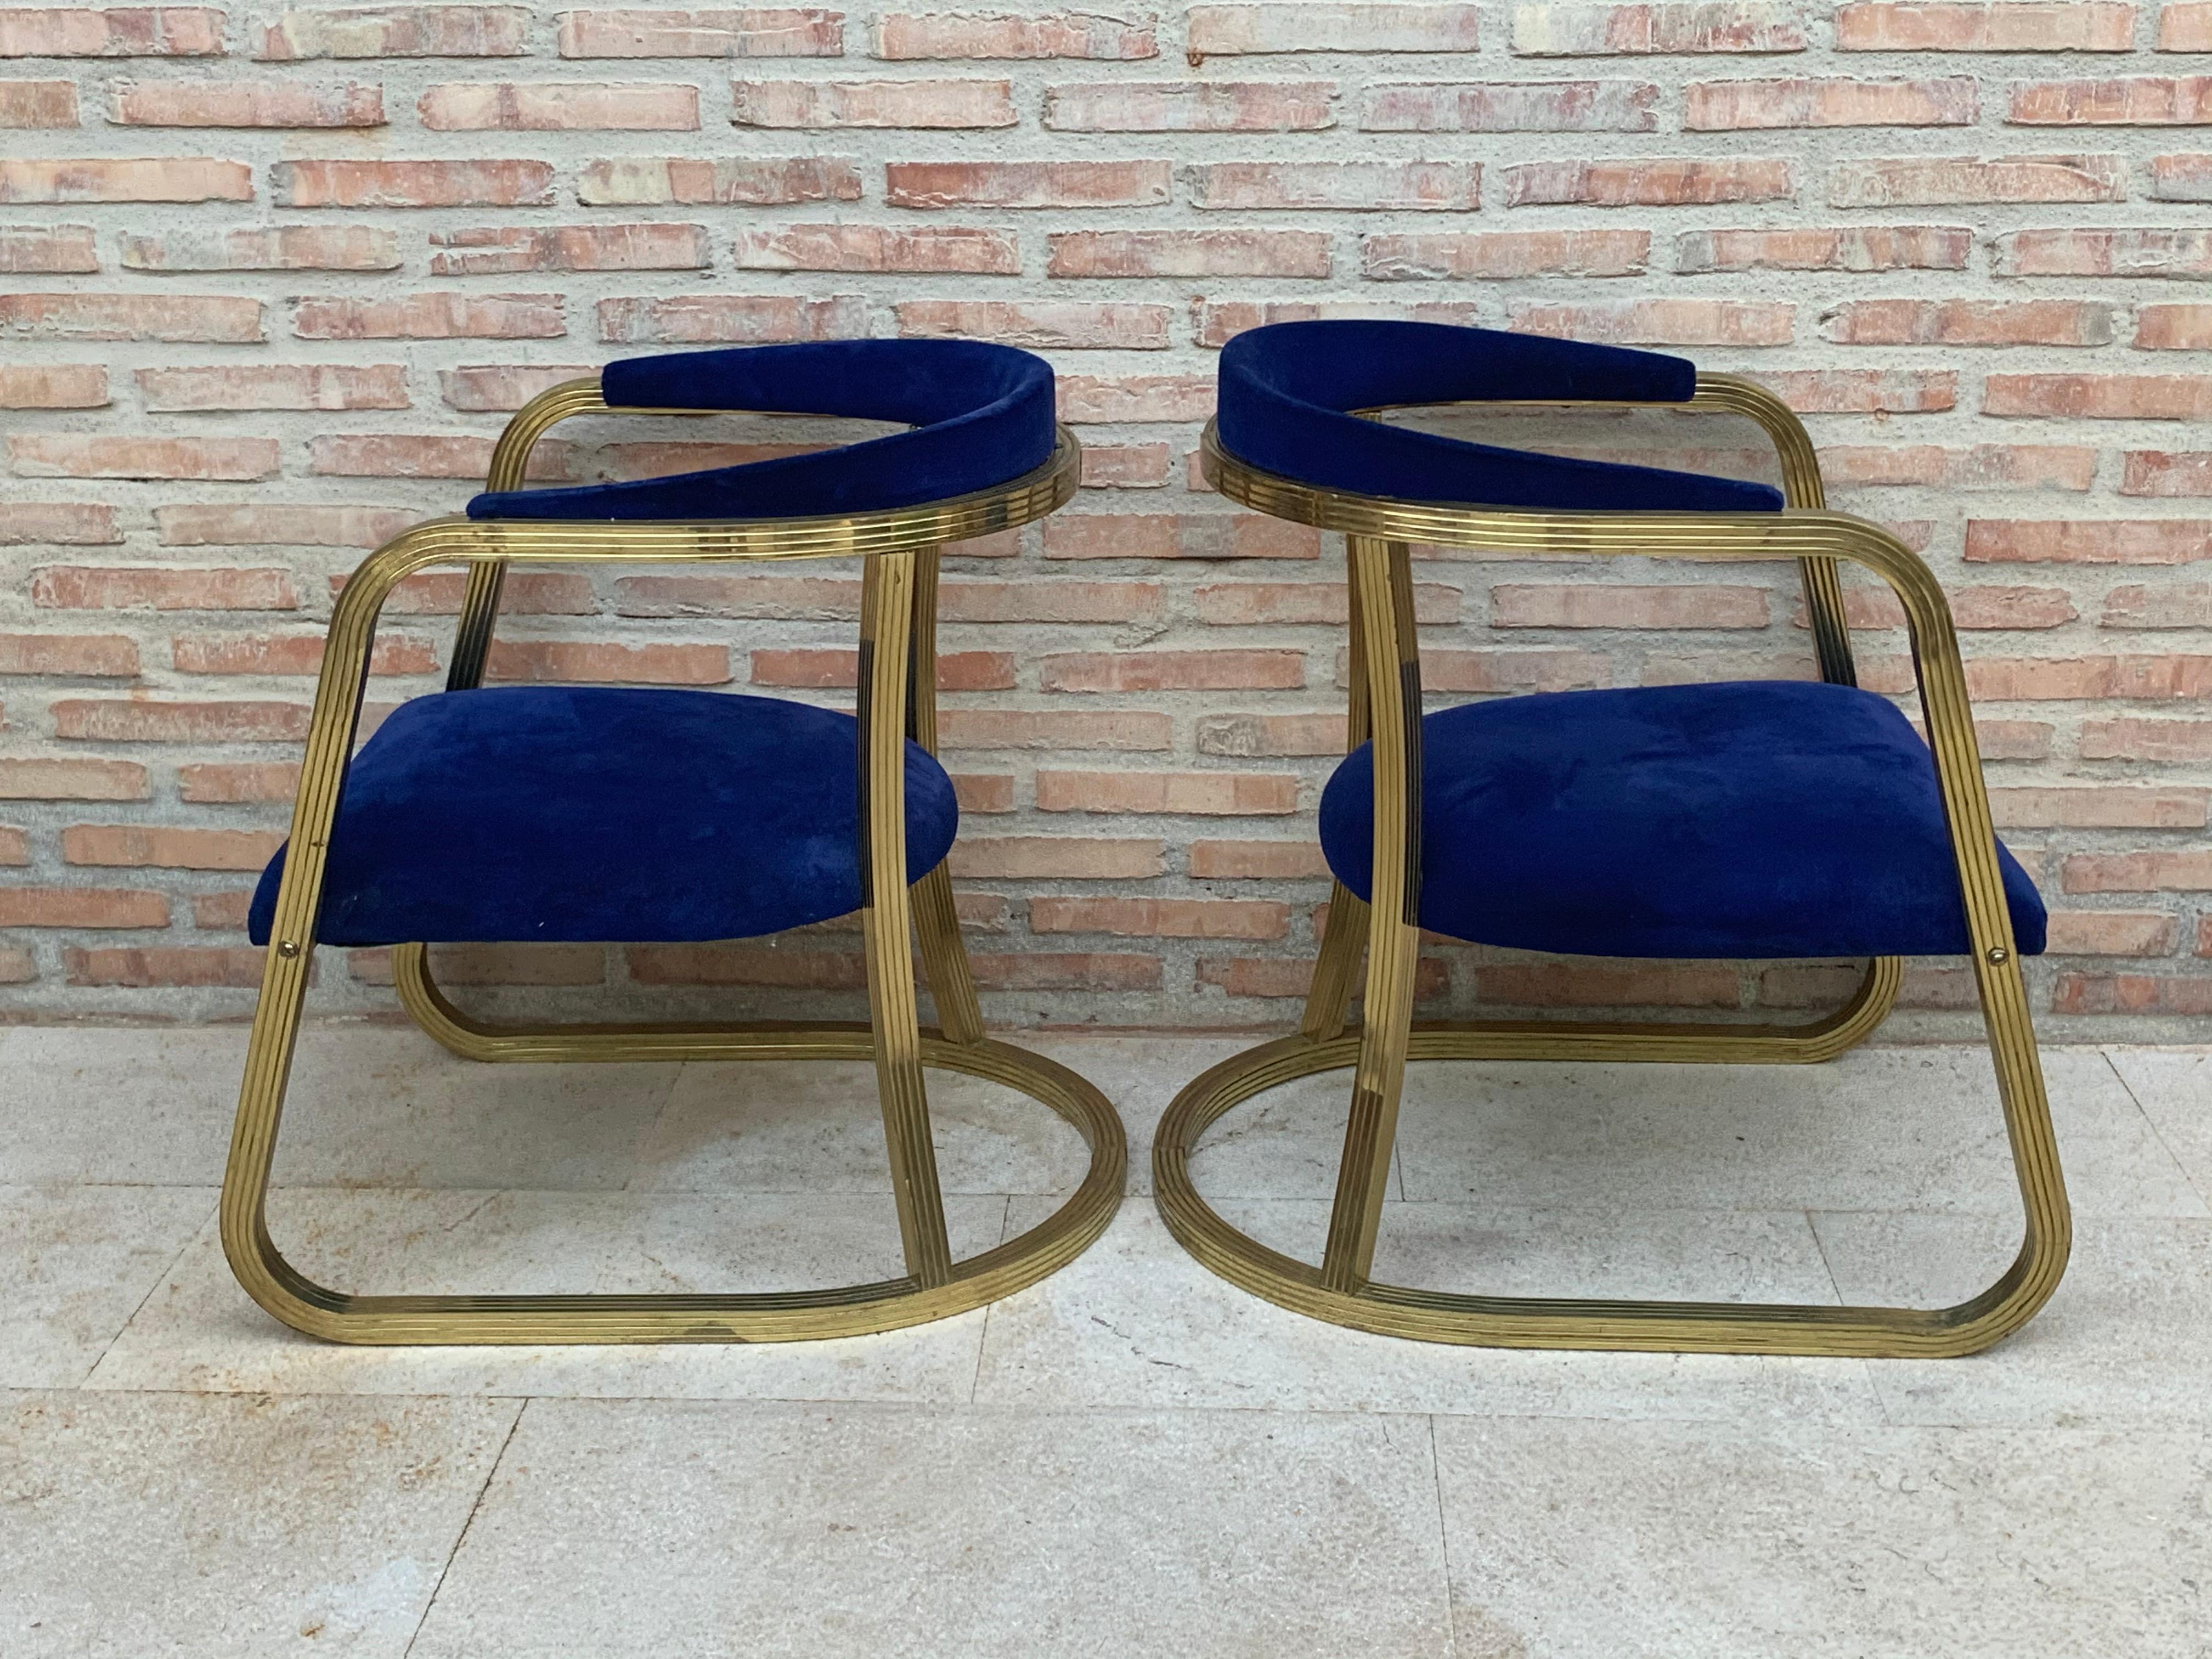 French Pair of Midcentury Gold Brass Chairs with Blue Velvet Upholstery In Good Condition For Sale In Miami, FL